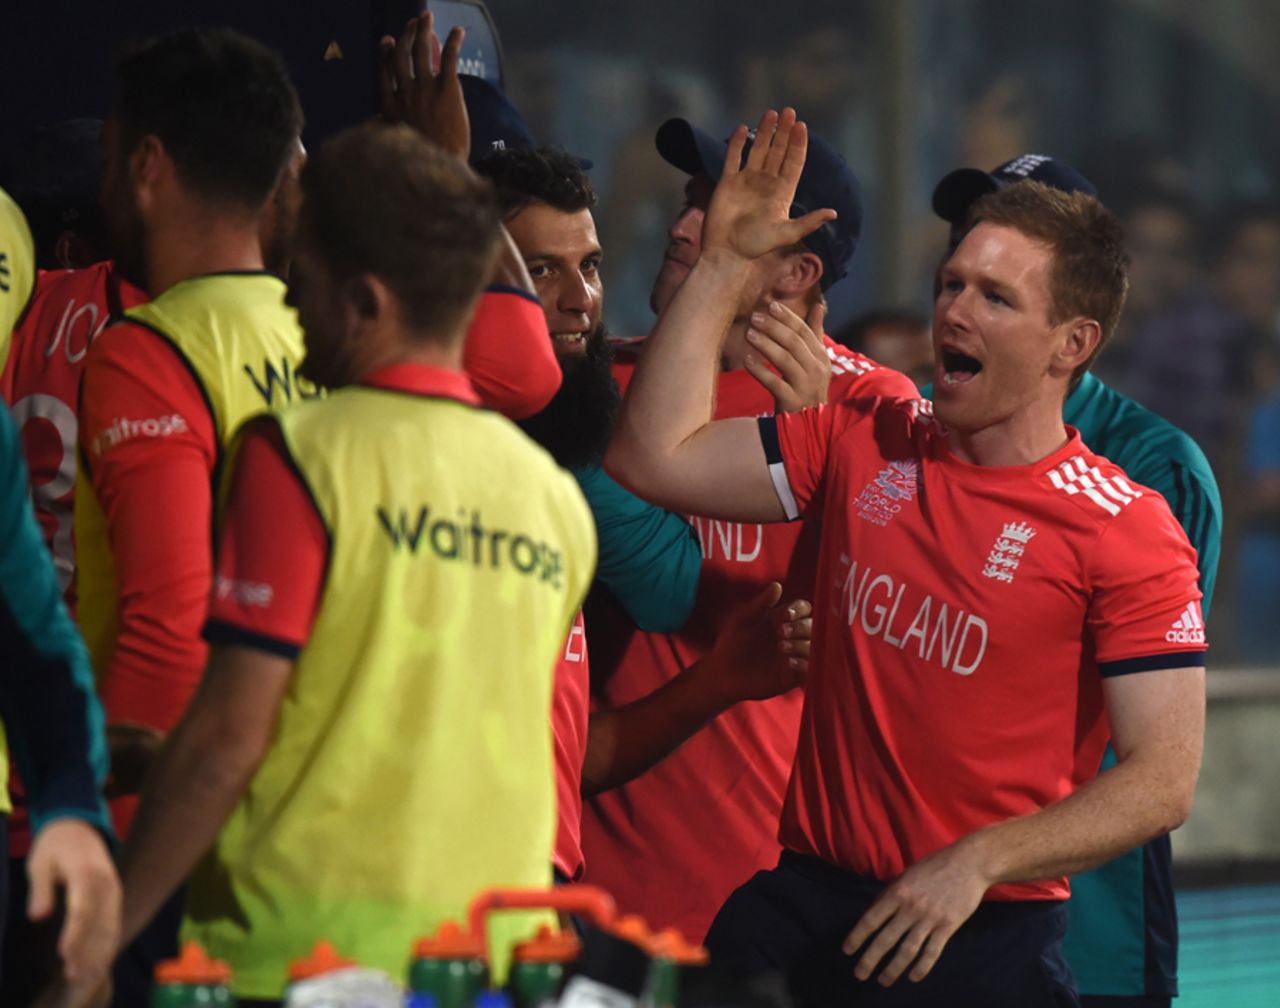 Eoin Morgan gives high fives all round after England's crushing win, England v New Zealand, World T20, Semi-final, Delhi, March 30, 2016